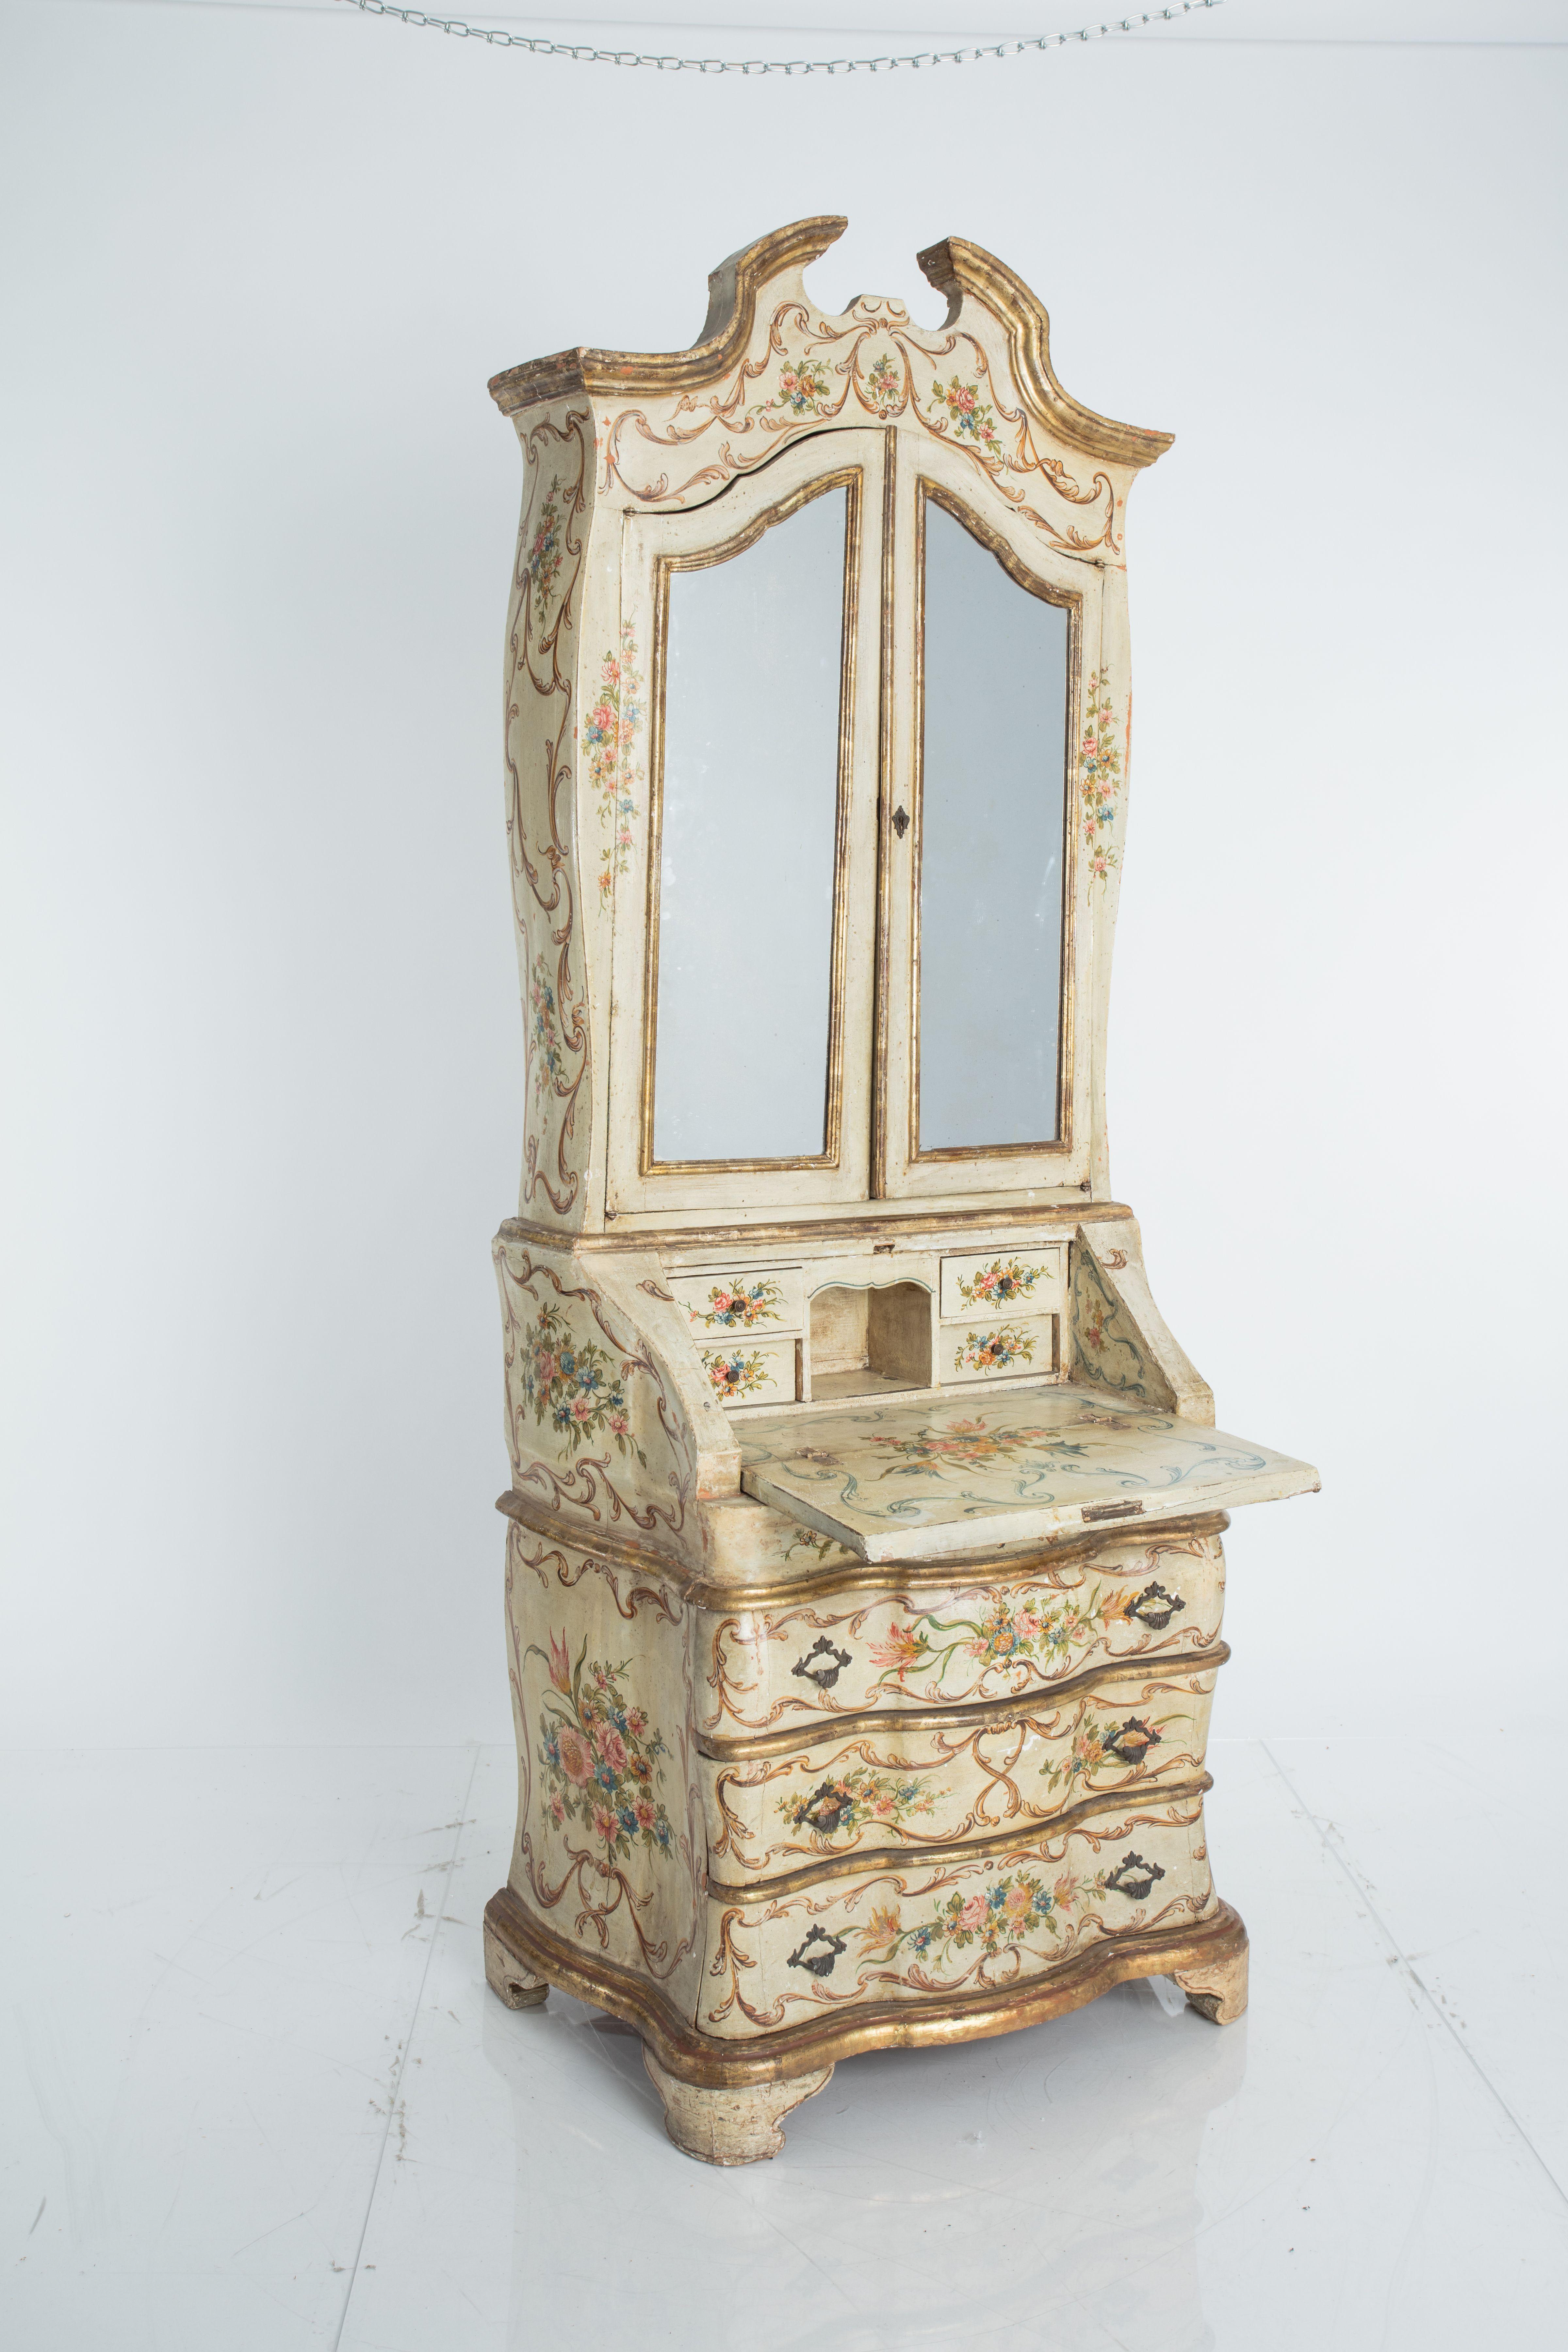 Italian Antique Rococo Style Venetian Secretary Cabinet with Gilt and Floral Motif